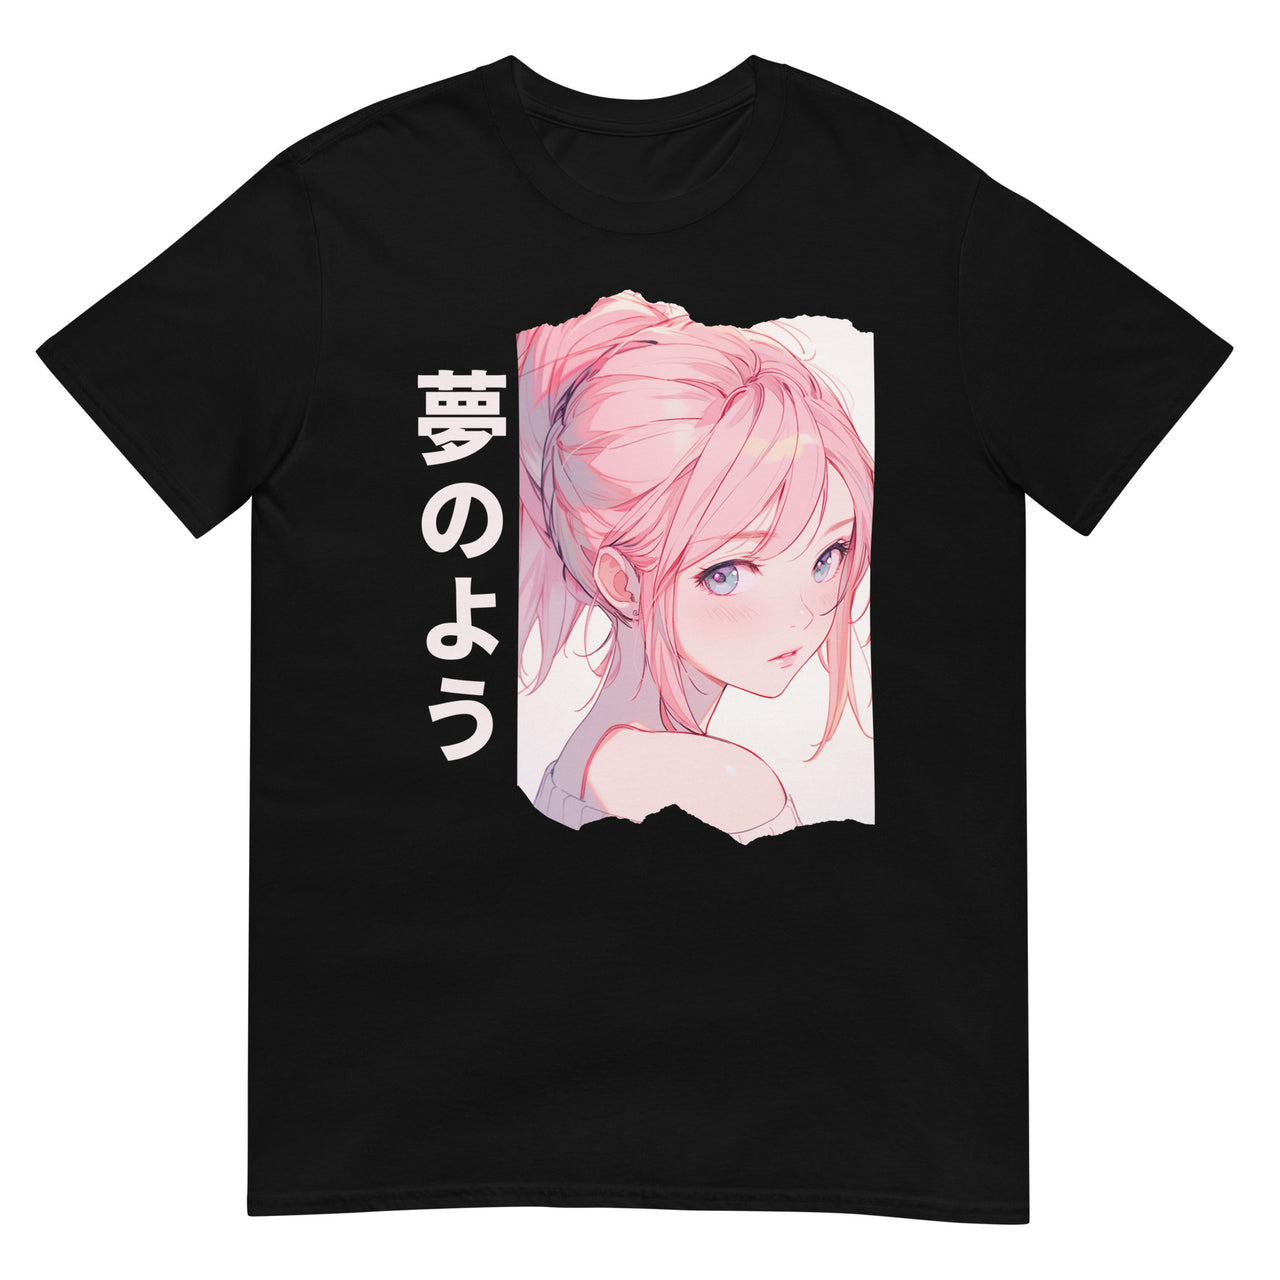 Dreamy Anime Girl with Pink Hair T-Shirt